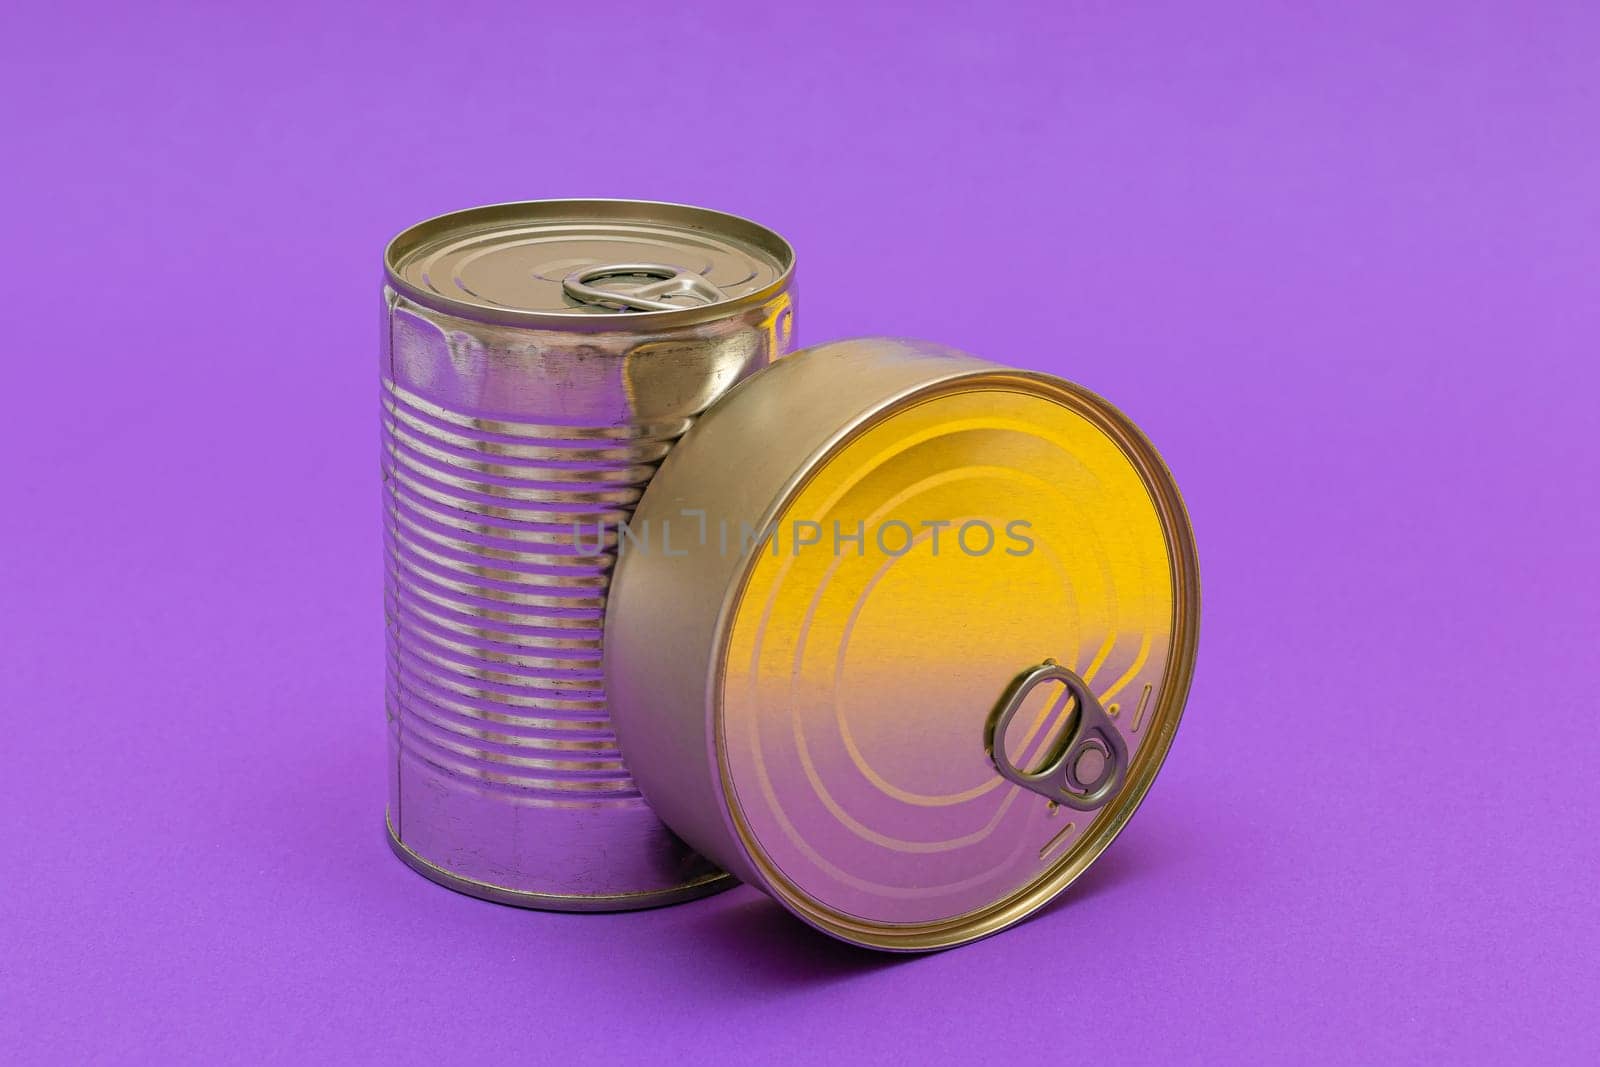 Unopened Tin Cans with Blank Edge on Violet Background. Canned Food. Aluminum Cans for Safe and Long Term Storage of Food. Steel Sealed Food Storage Containers